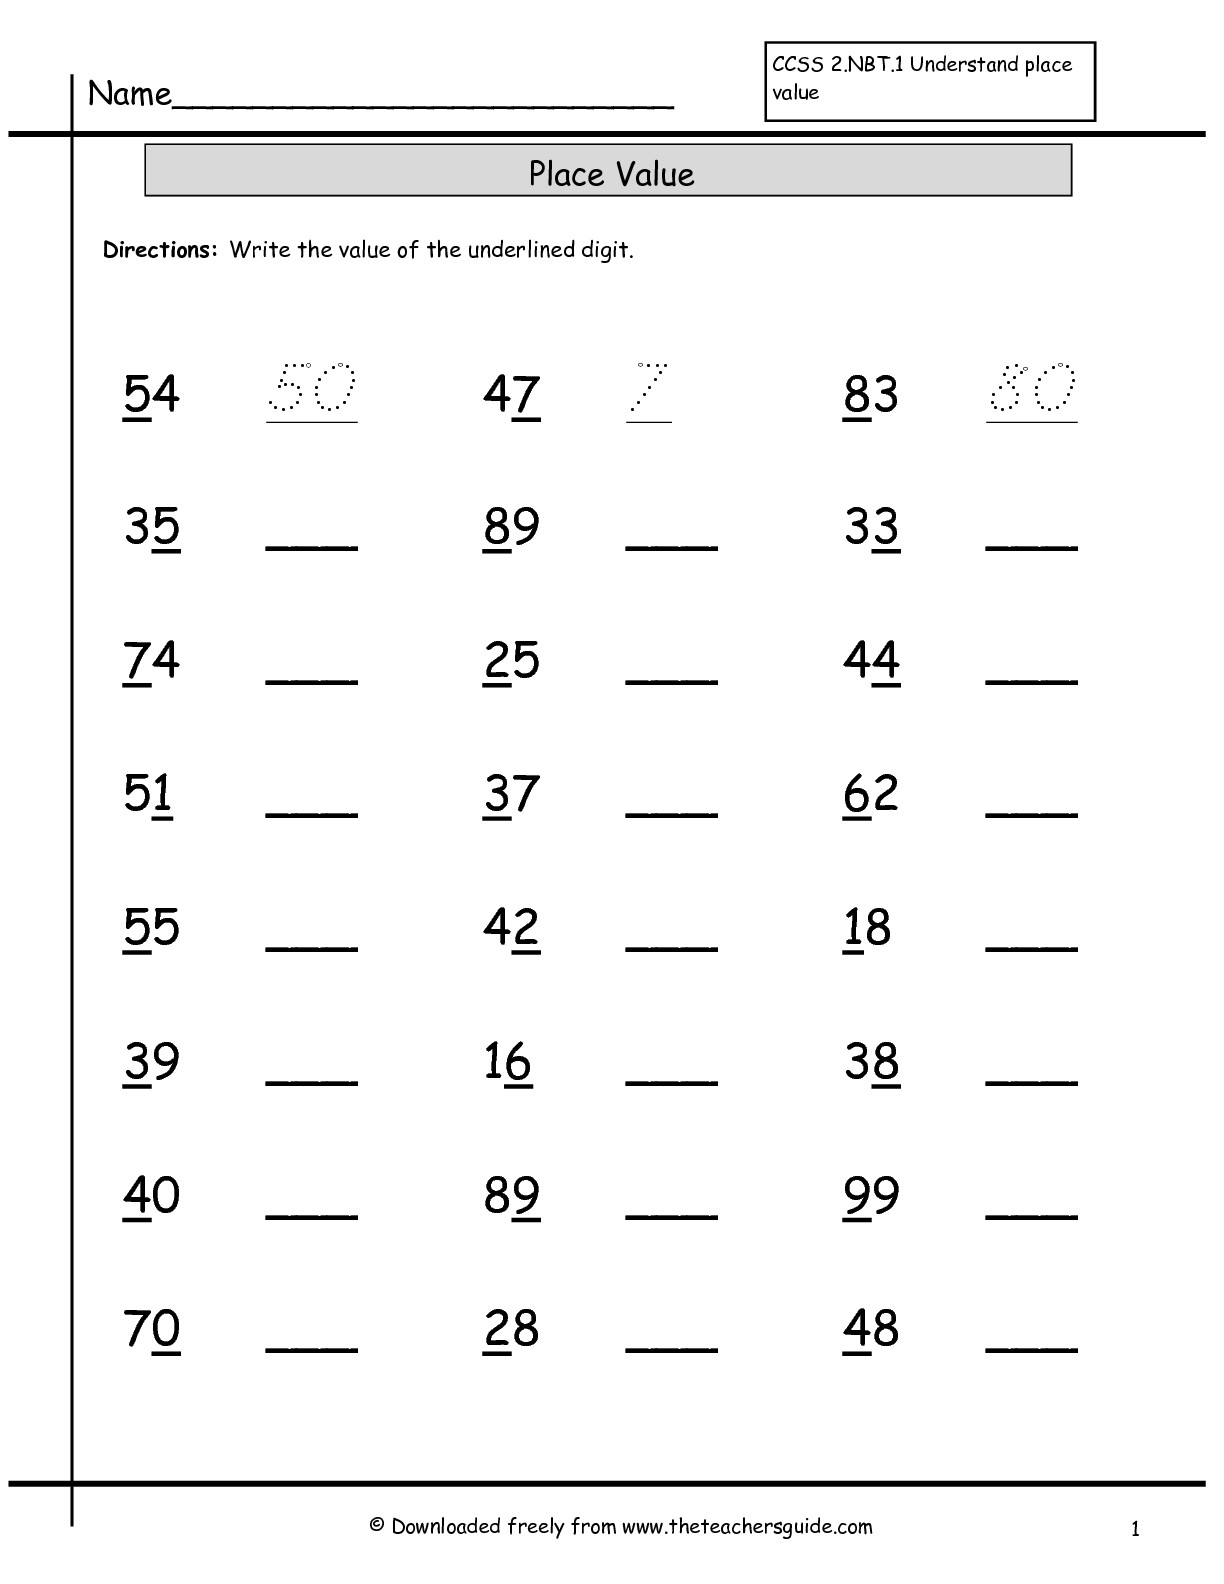 place-value-in-first-grade-place-values-first-grade-math-tens-and-ones